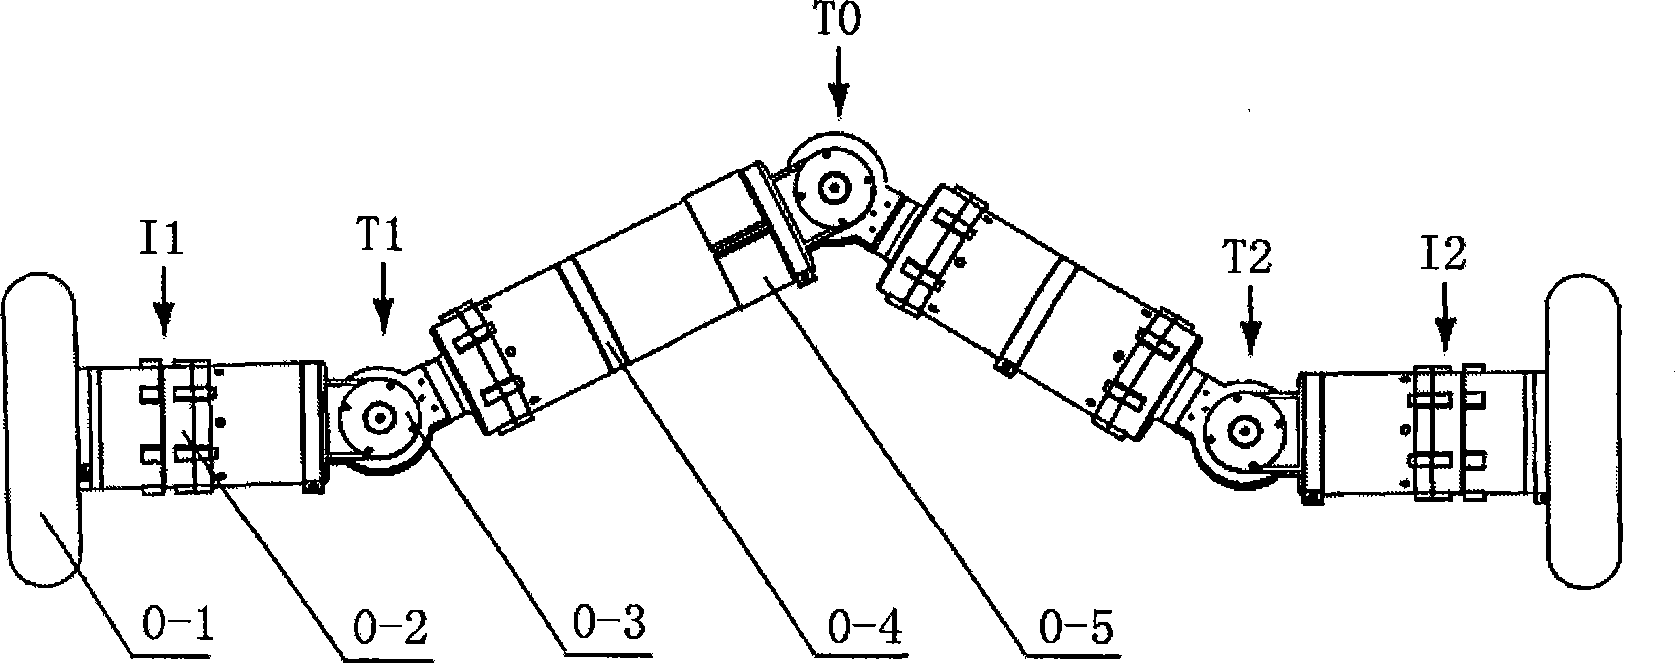 Modular double-wheel driven mobile robot capable of changing wheel span and wheel direction